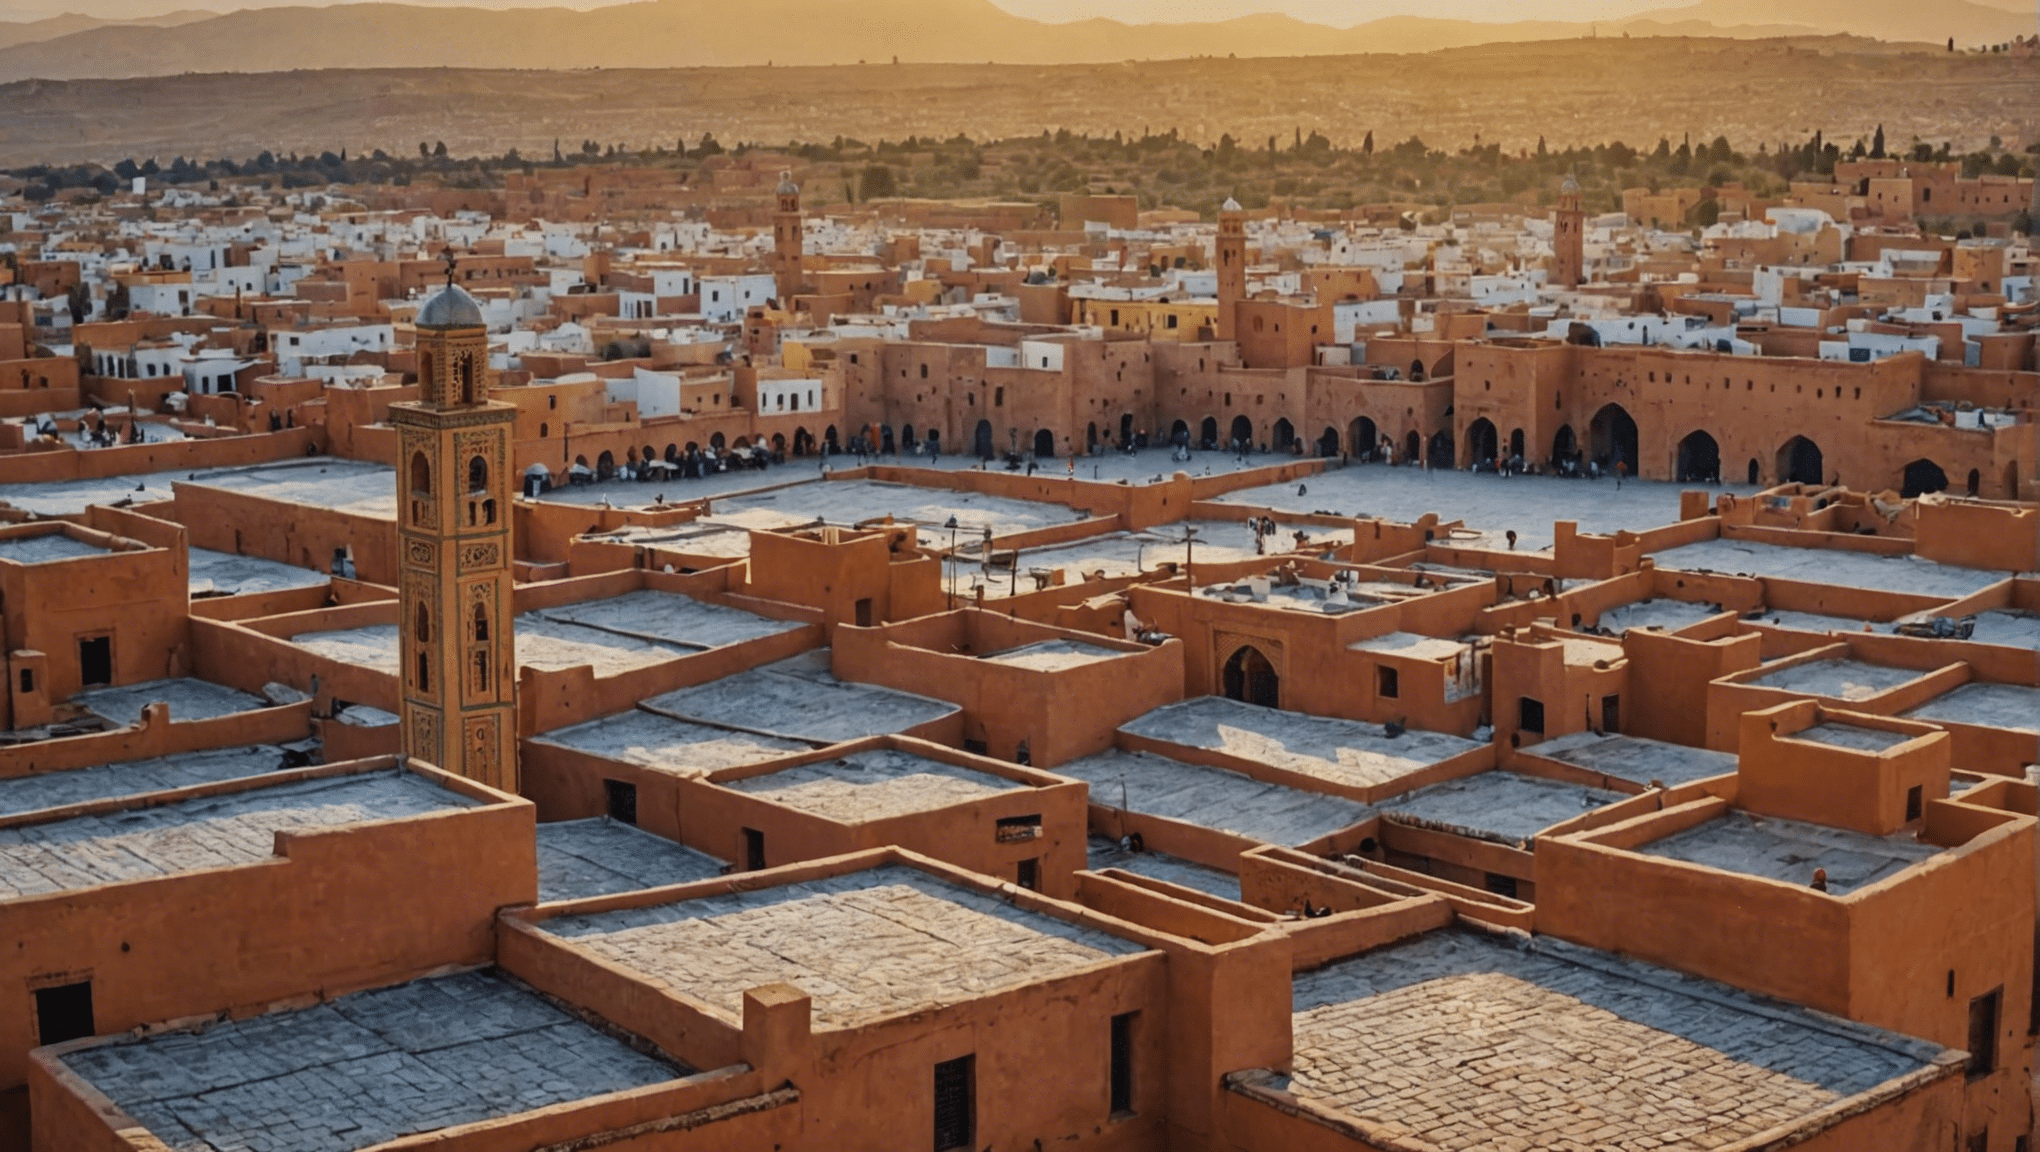 find out what the weather is like in morocco in june with our helpful guide. get detailed information on temperatures, rainfall, and more to help you plan your trip.